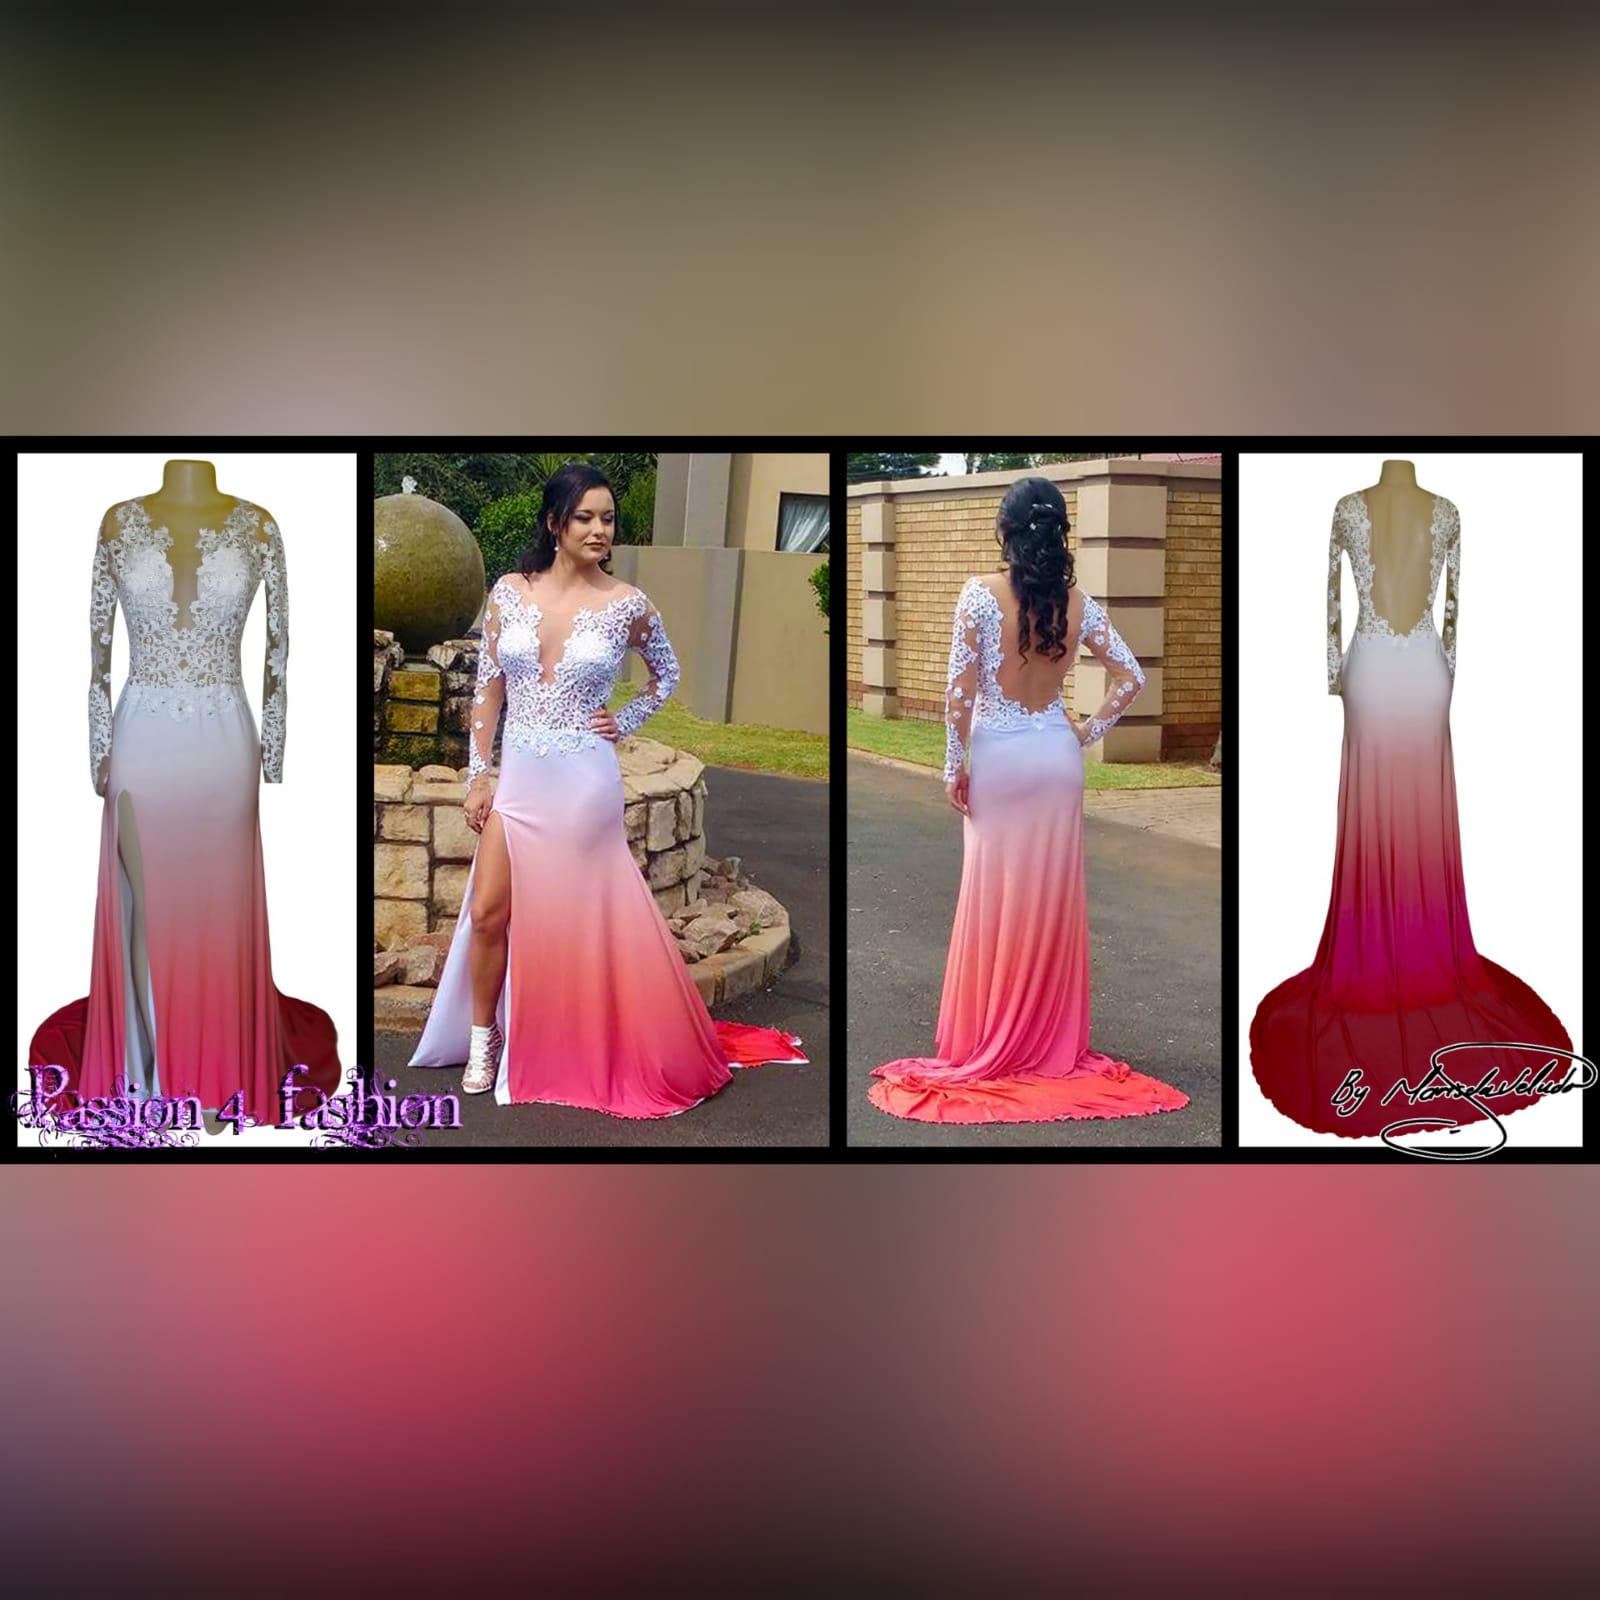 White and peach ombre matric farewell dress with a white lace bodice 3 white and peach ombre matric farewell dress with a white lace bodice, an illusion open back and long sleeves. With a slit and a train.